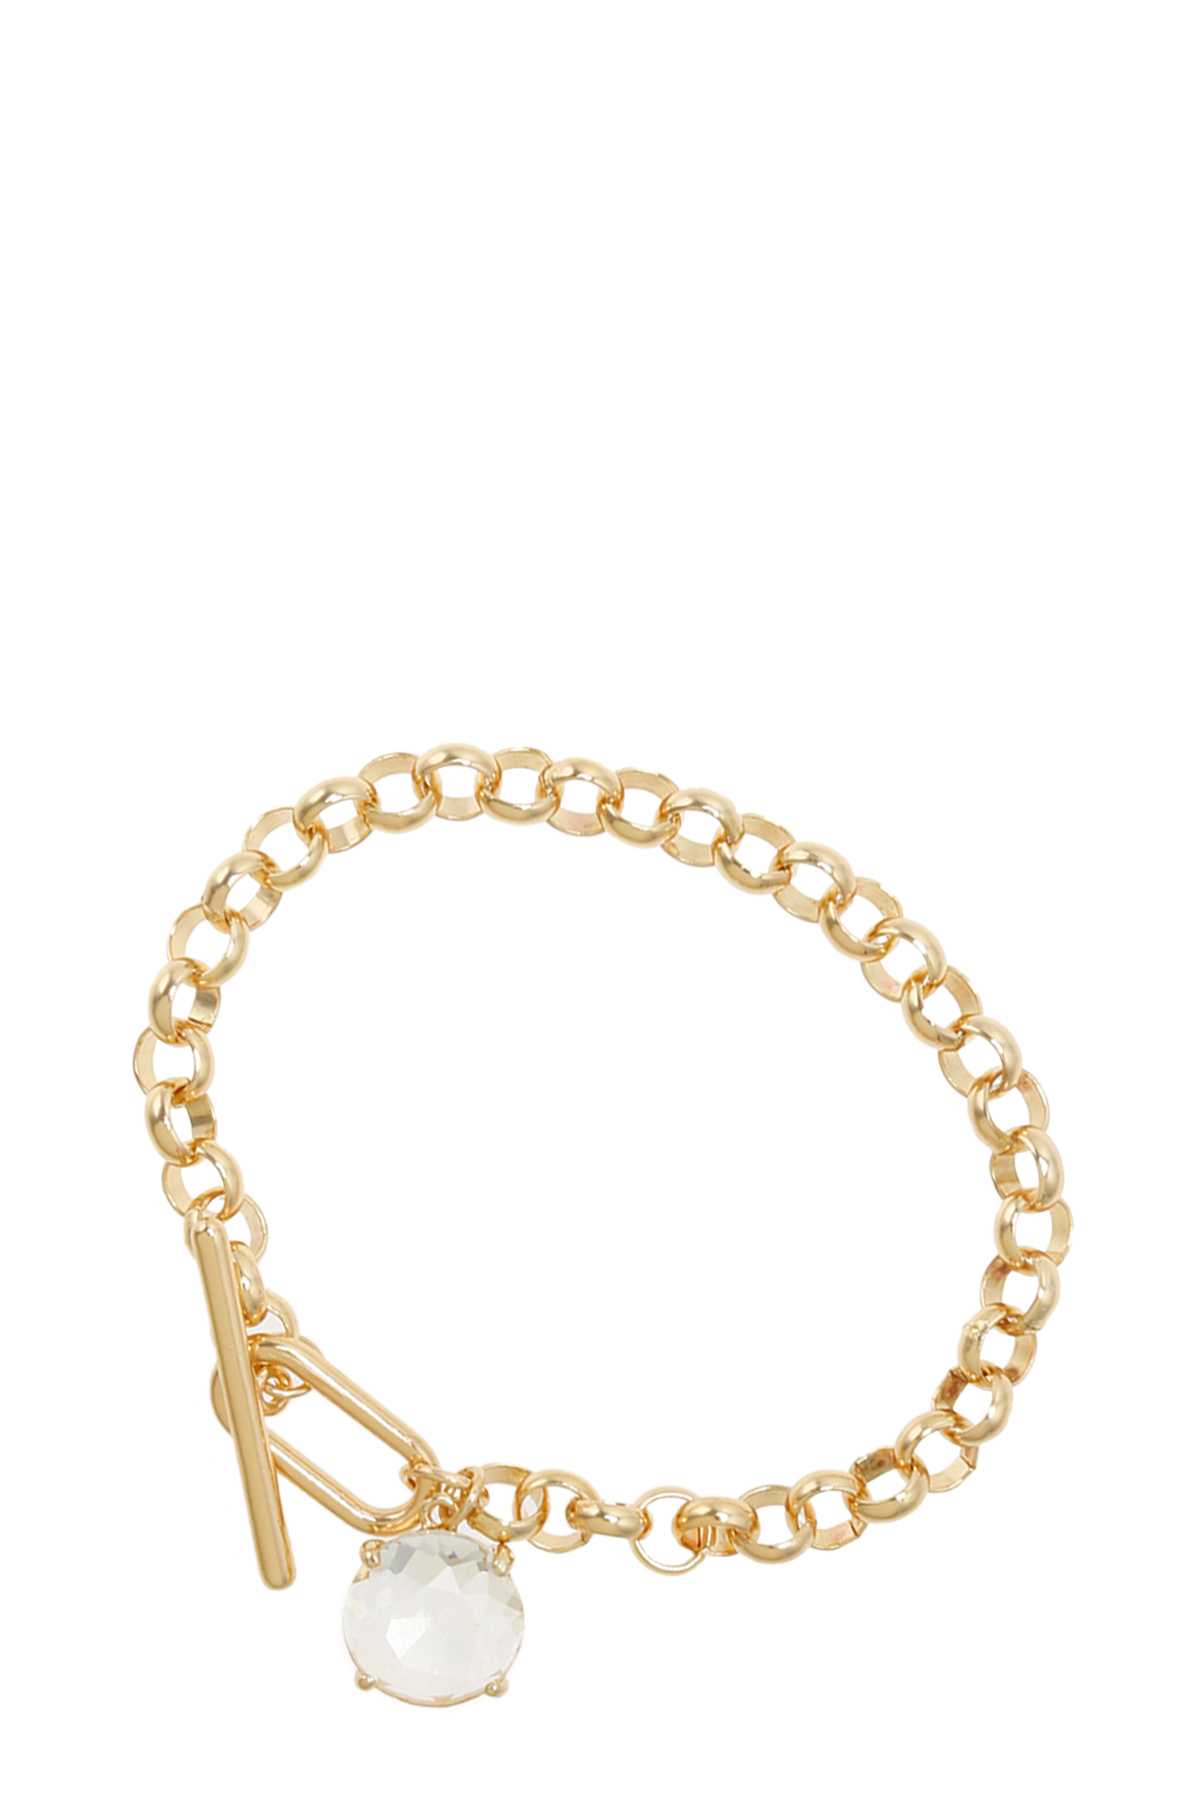 Rollo Chain Toggle Bracelet with Round Crystal Accent